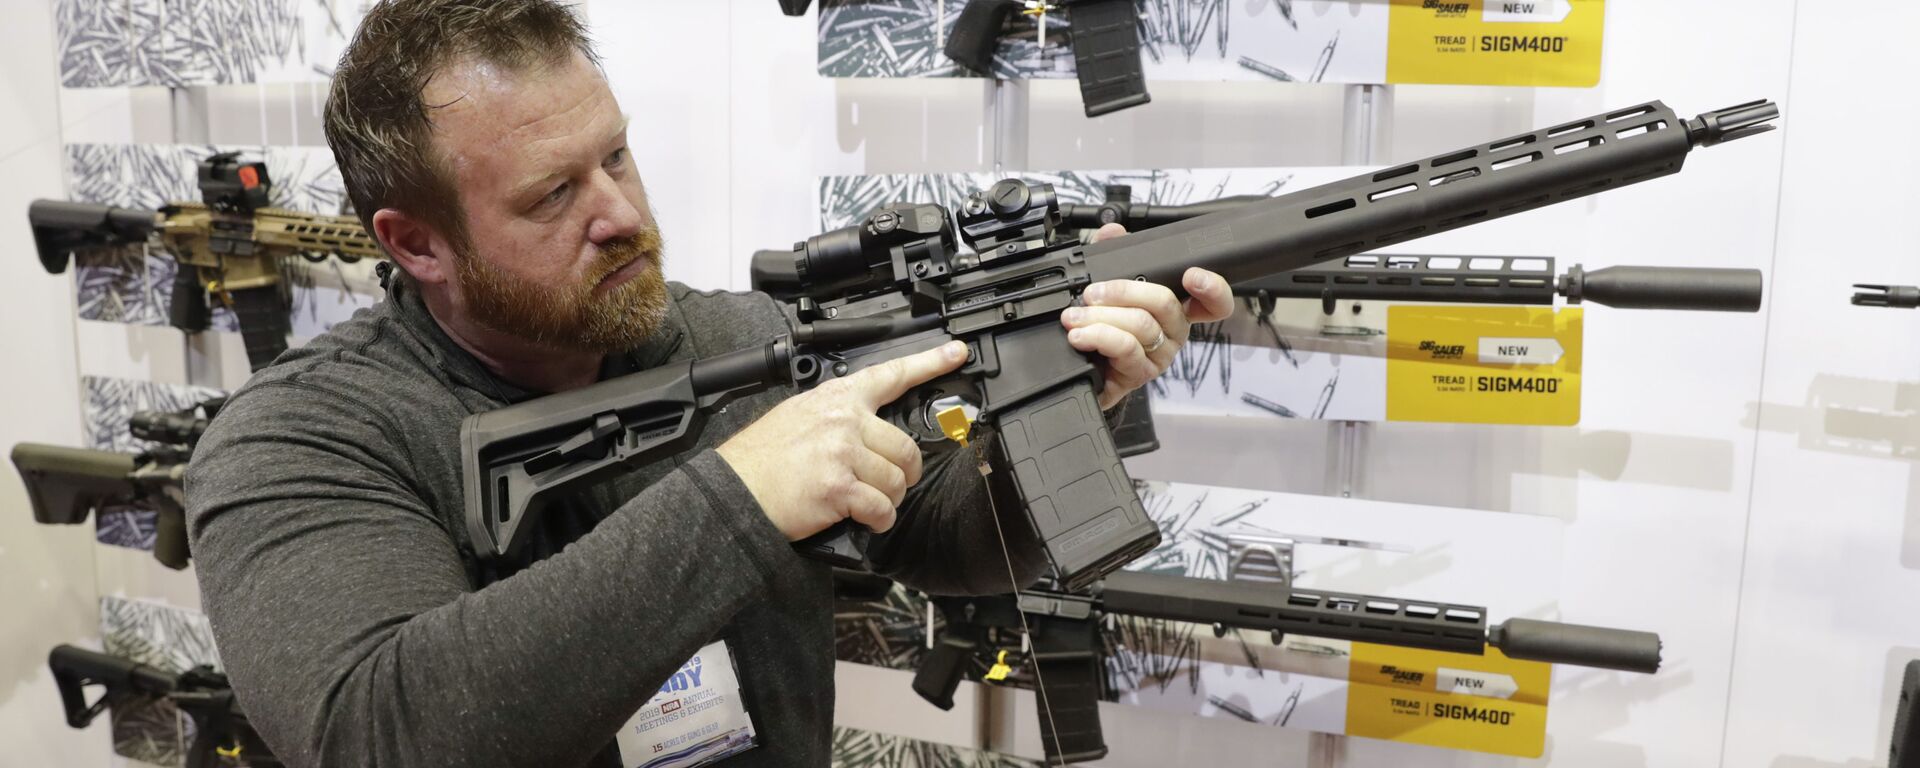 Sergeant Bryan Oberc of Munster, Indiana, US, tries out an AR-15 from Sig Sauer in the exhibition hall at the National Rifle Association's Annual Meeting in state capital, Indianapolis, Saturday, 27 April 2019. - Sputnik International, 1920, 25.03.2021